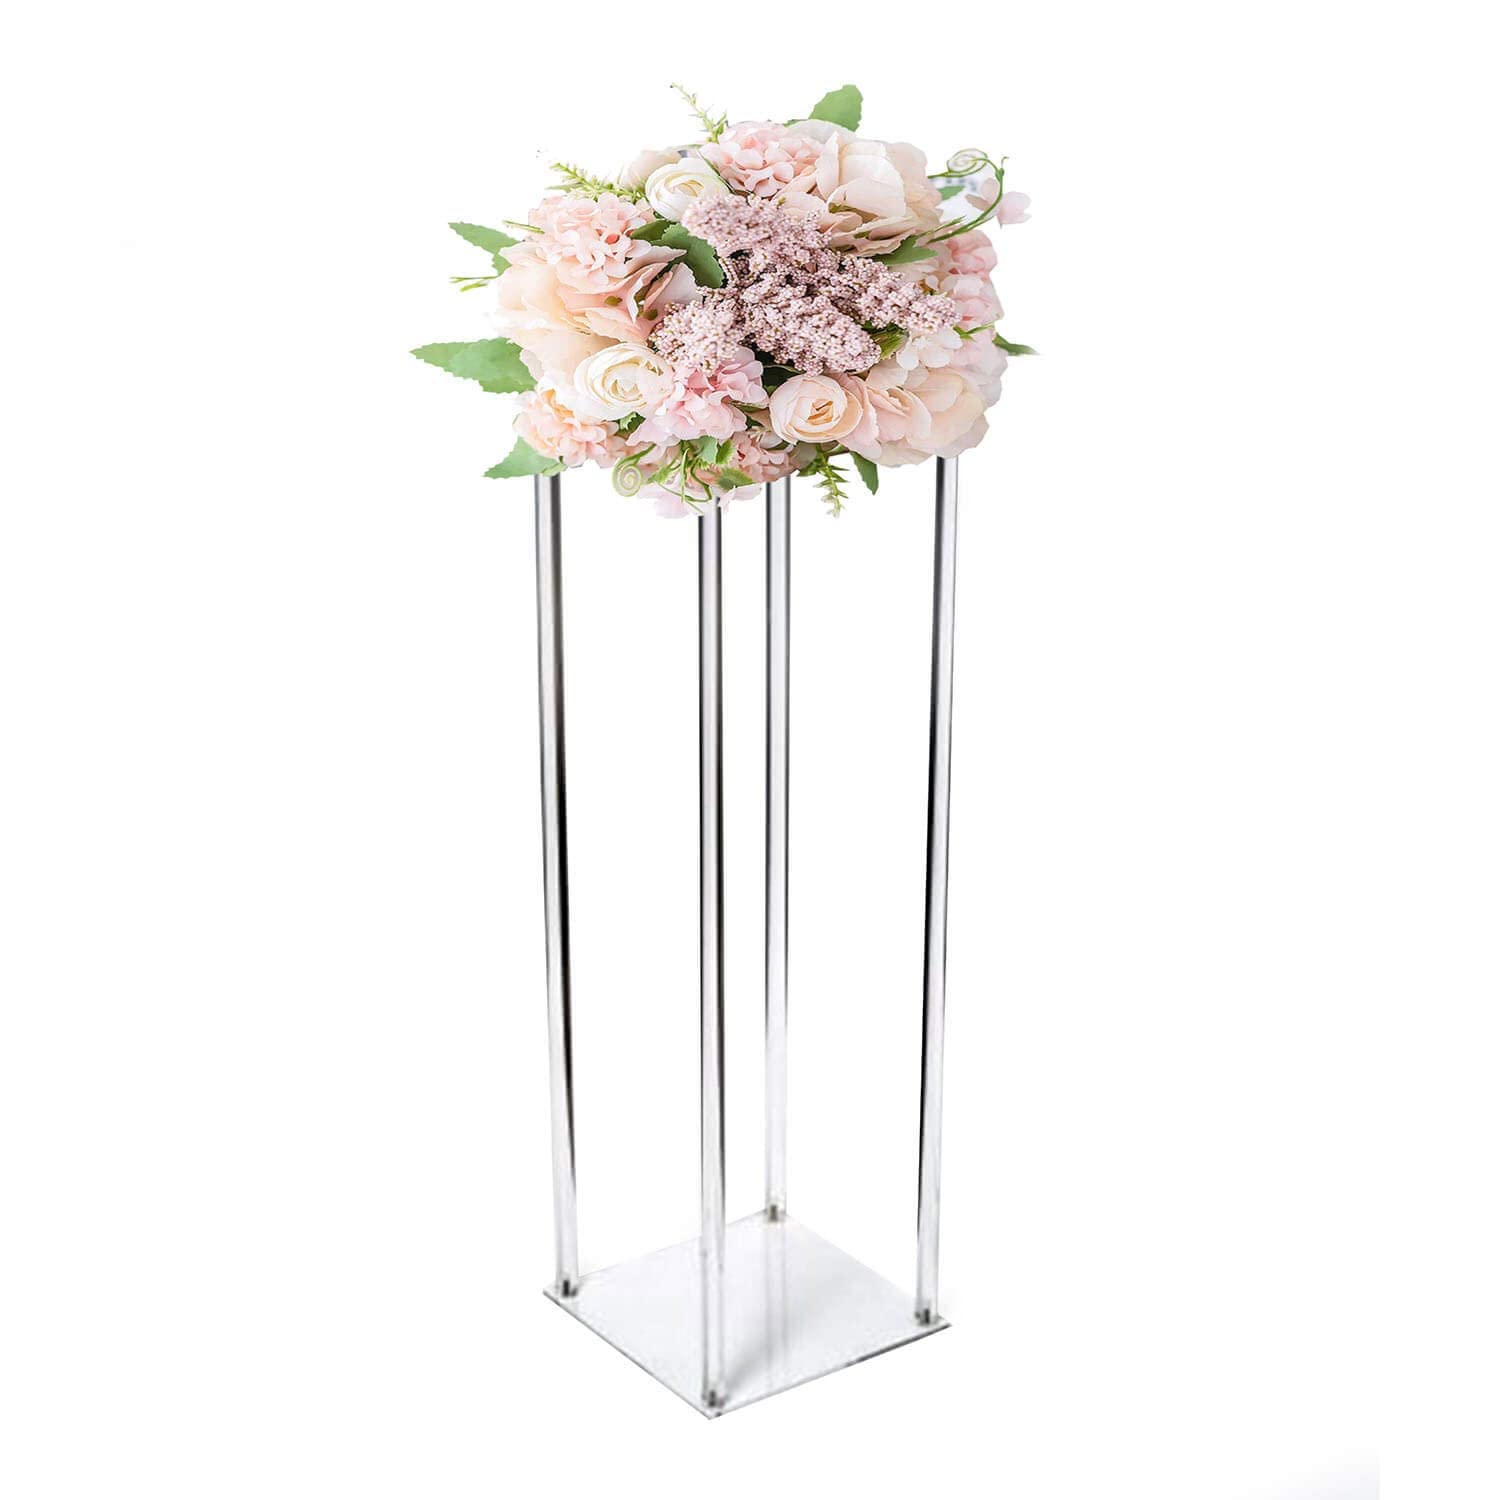 Simprefine 2 Pack 24'' Tall 8'' Dia. Acrylic Flower Stand Wedding Centerpieces Marriage Decorations Supplies Tabletop Decor Clear Display Rack Crystal Stage Pillar Party Props Floral Event Backdrops